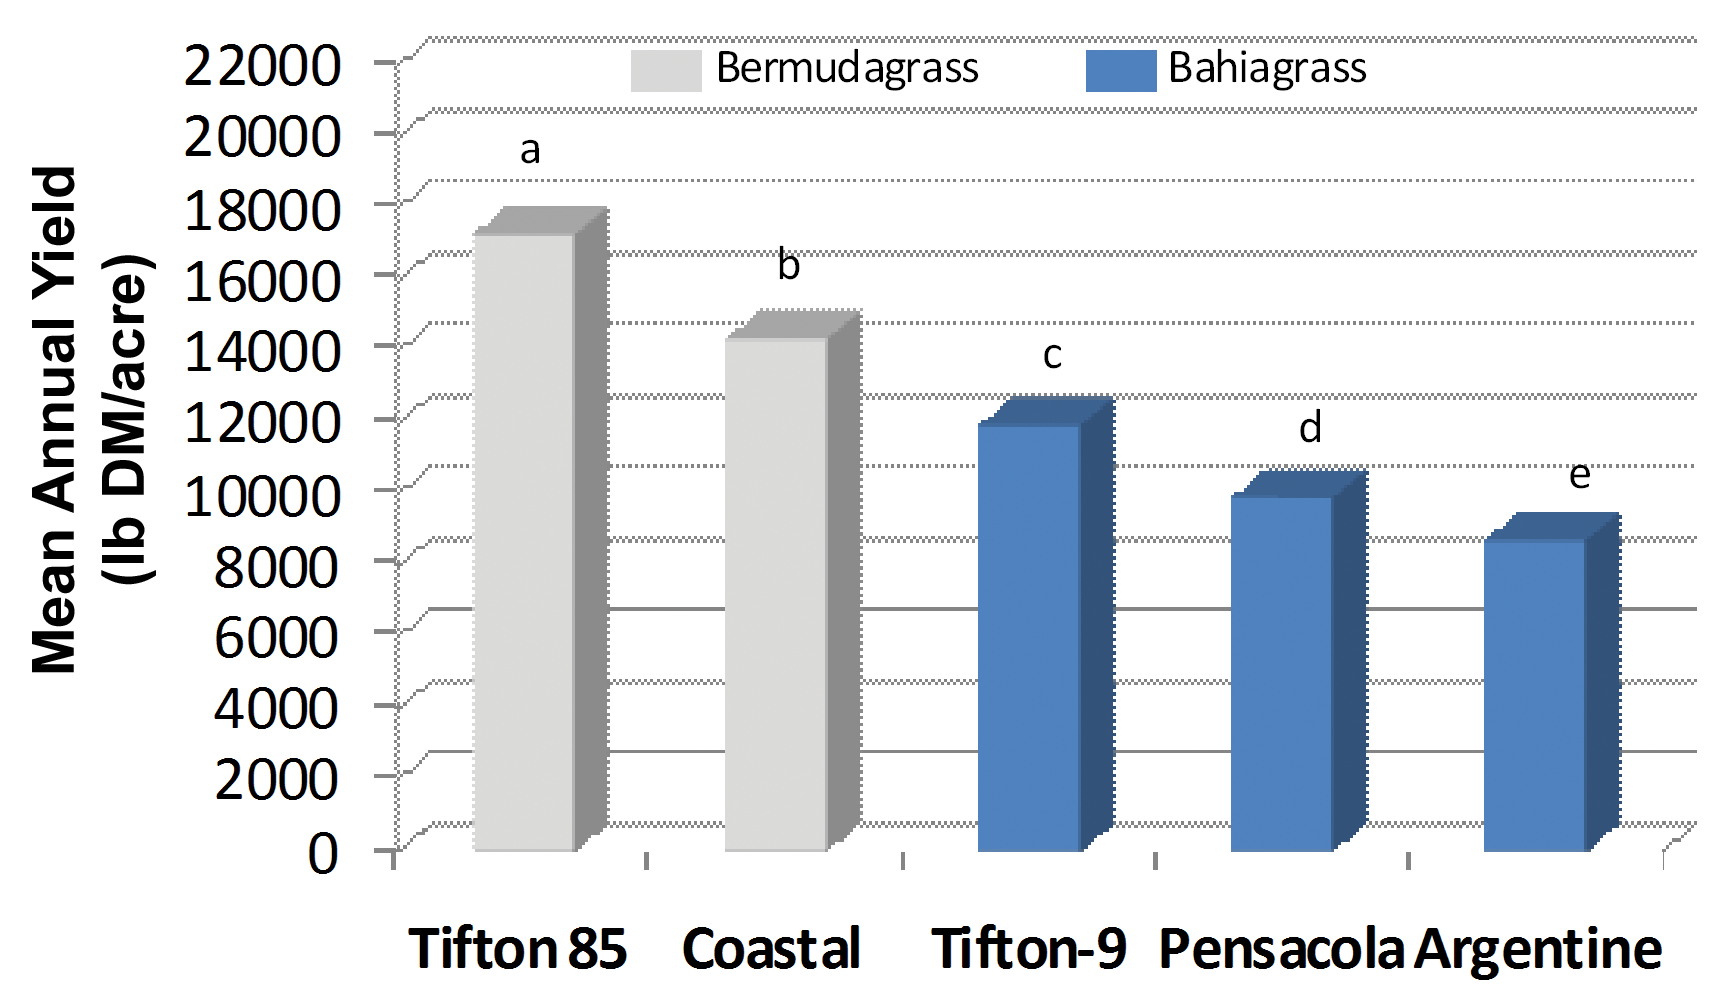 Figure 4. Average forage yield from two bermudagrass and three bahiagrass varieties grown in Tifton, GA over three years (2003-2005). Treatments labeled with different letters were significantly different (α=0.05).